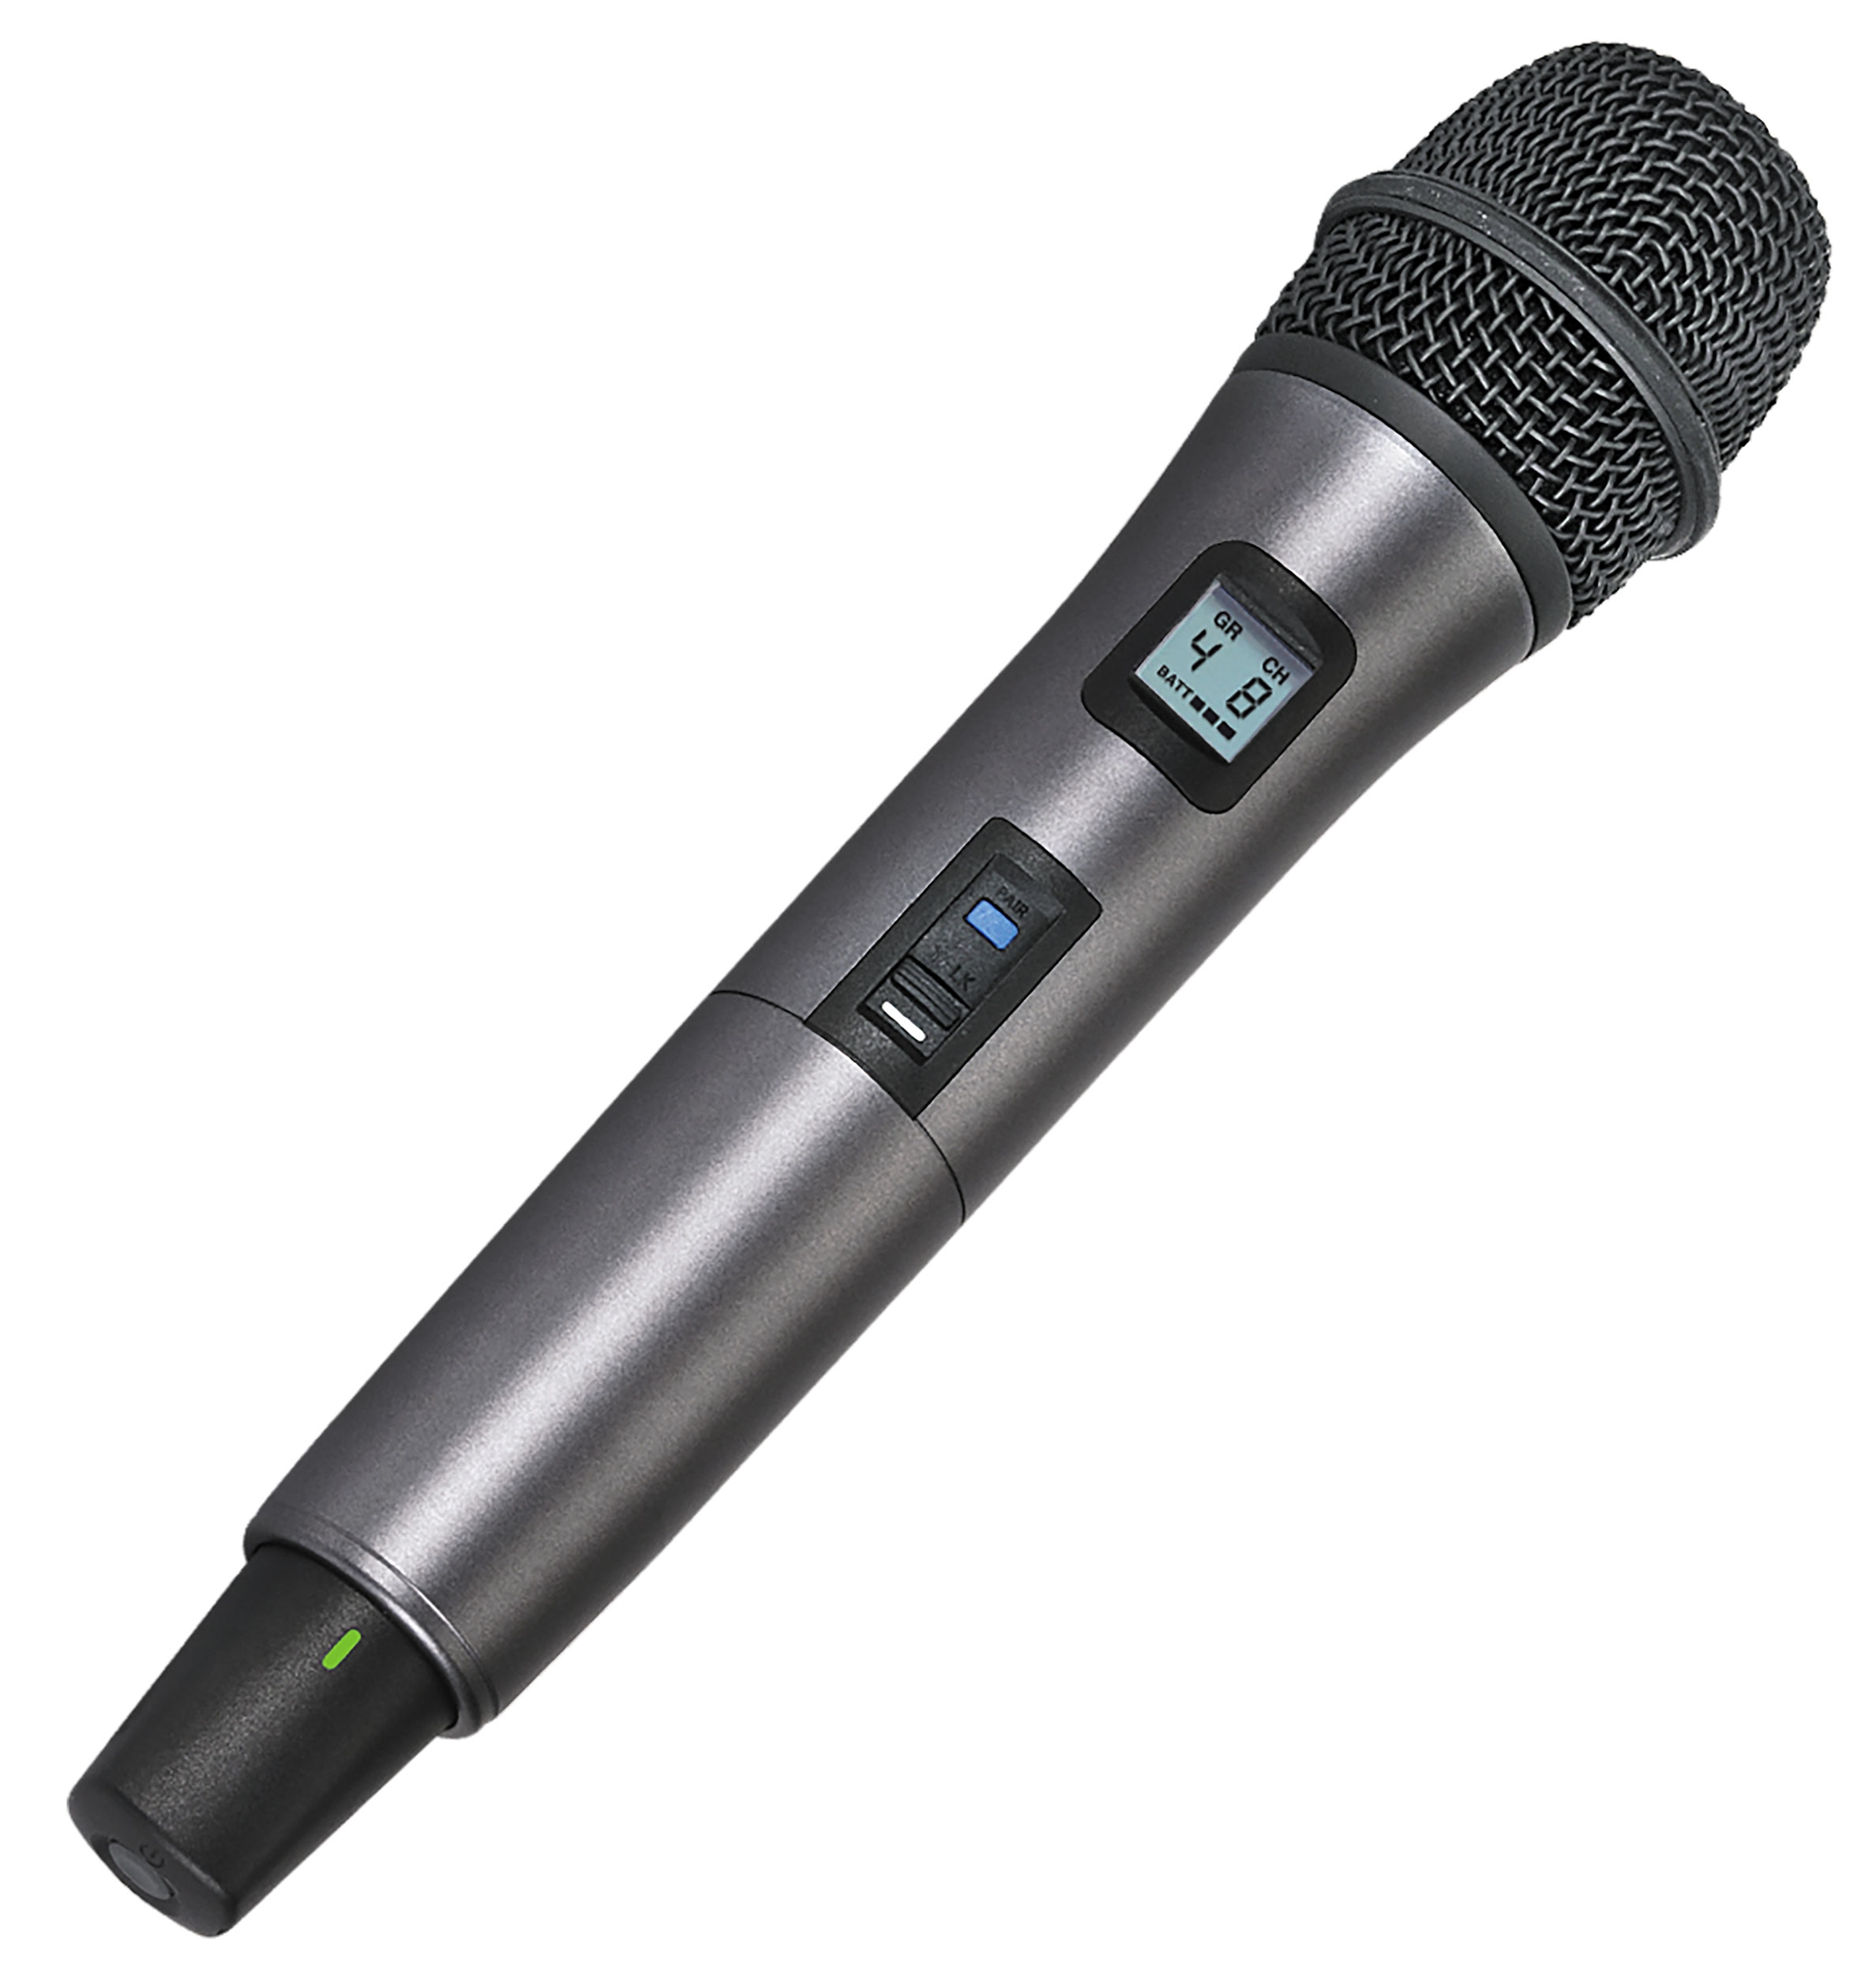 UHF handheld microphone with dynamic cell - 500Mhz range